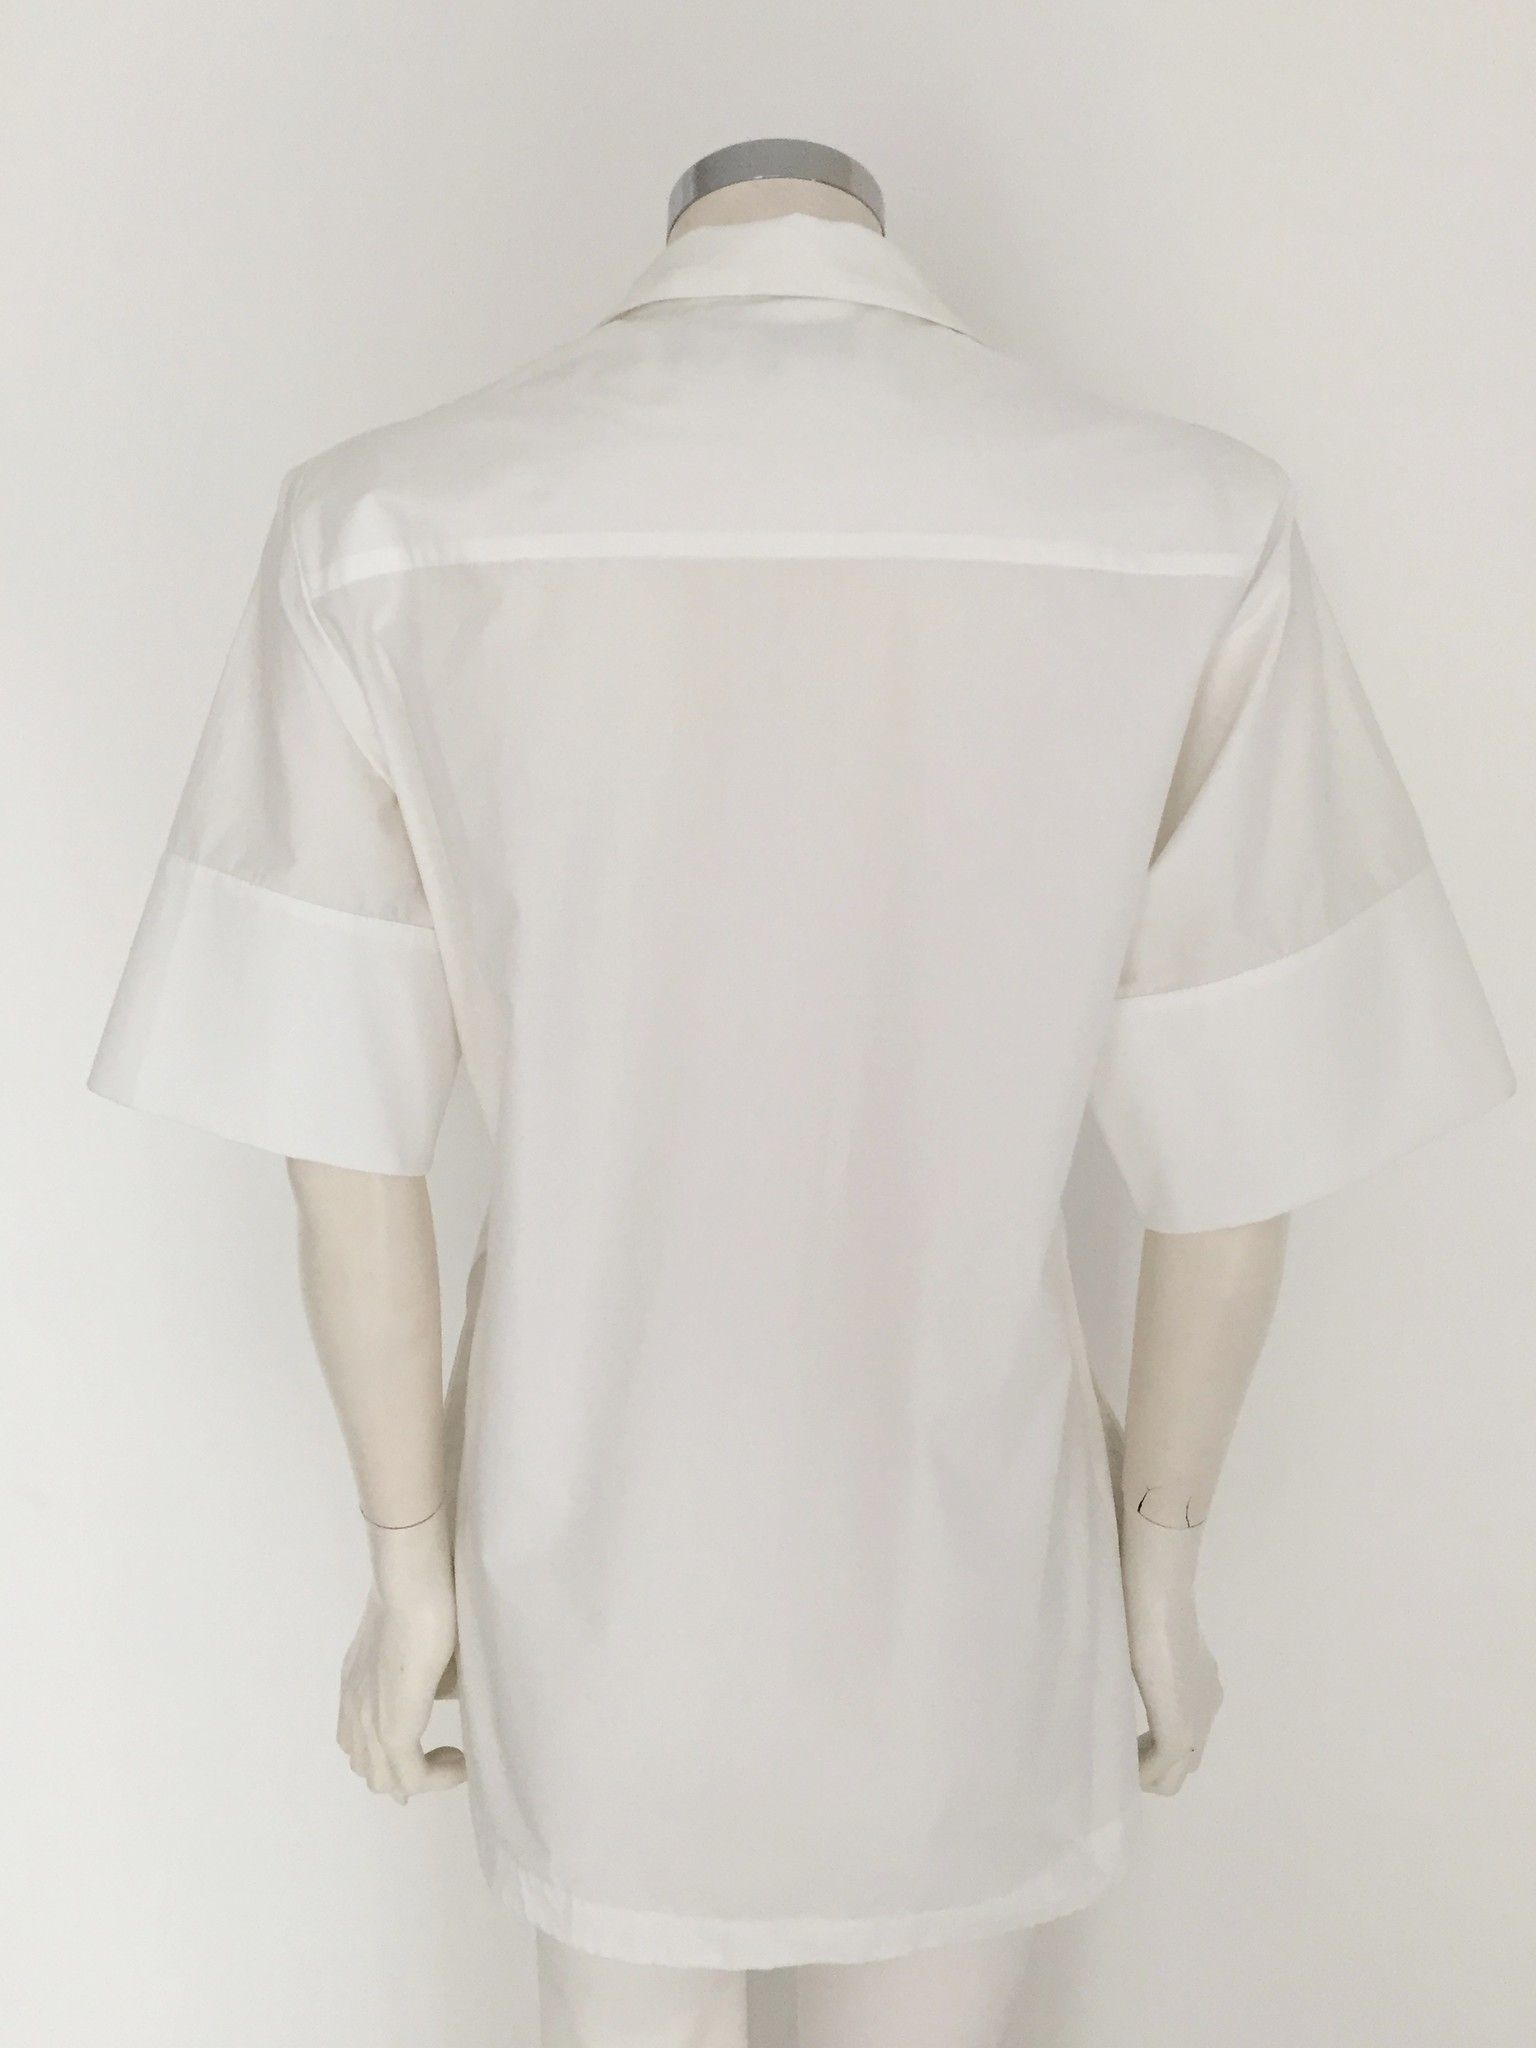 Shirt with Removable Panel "Style" Cod.GF42